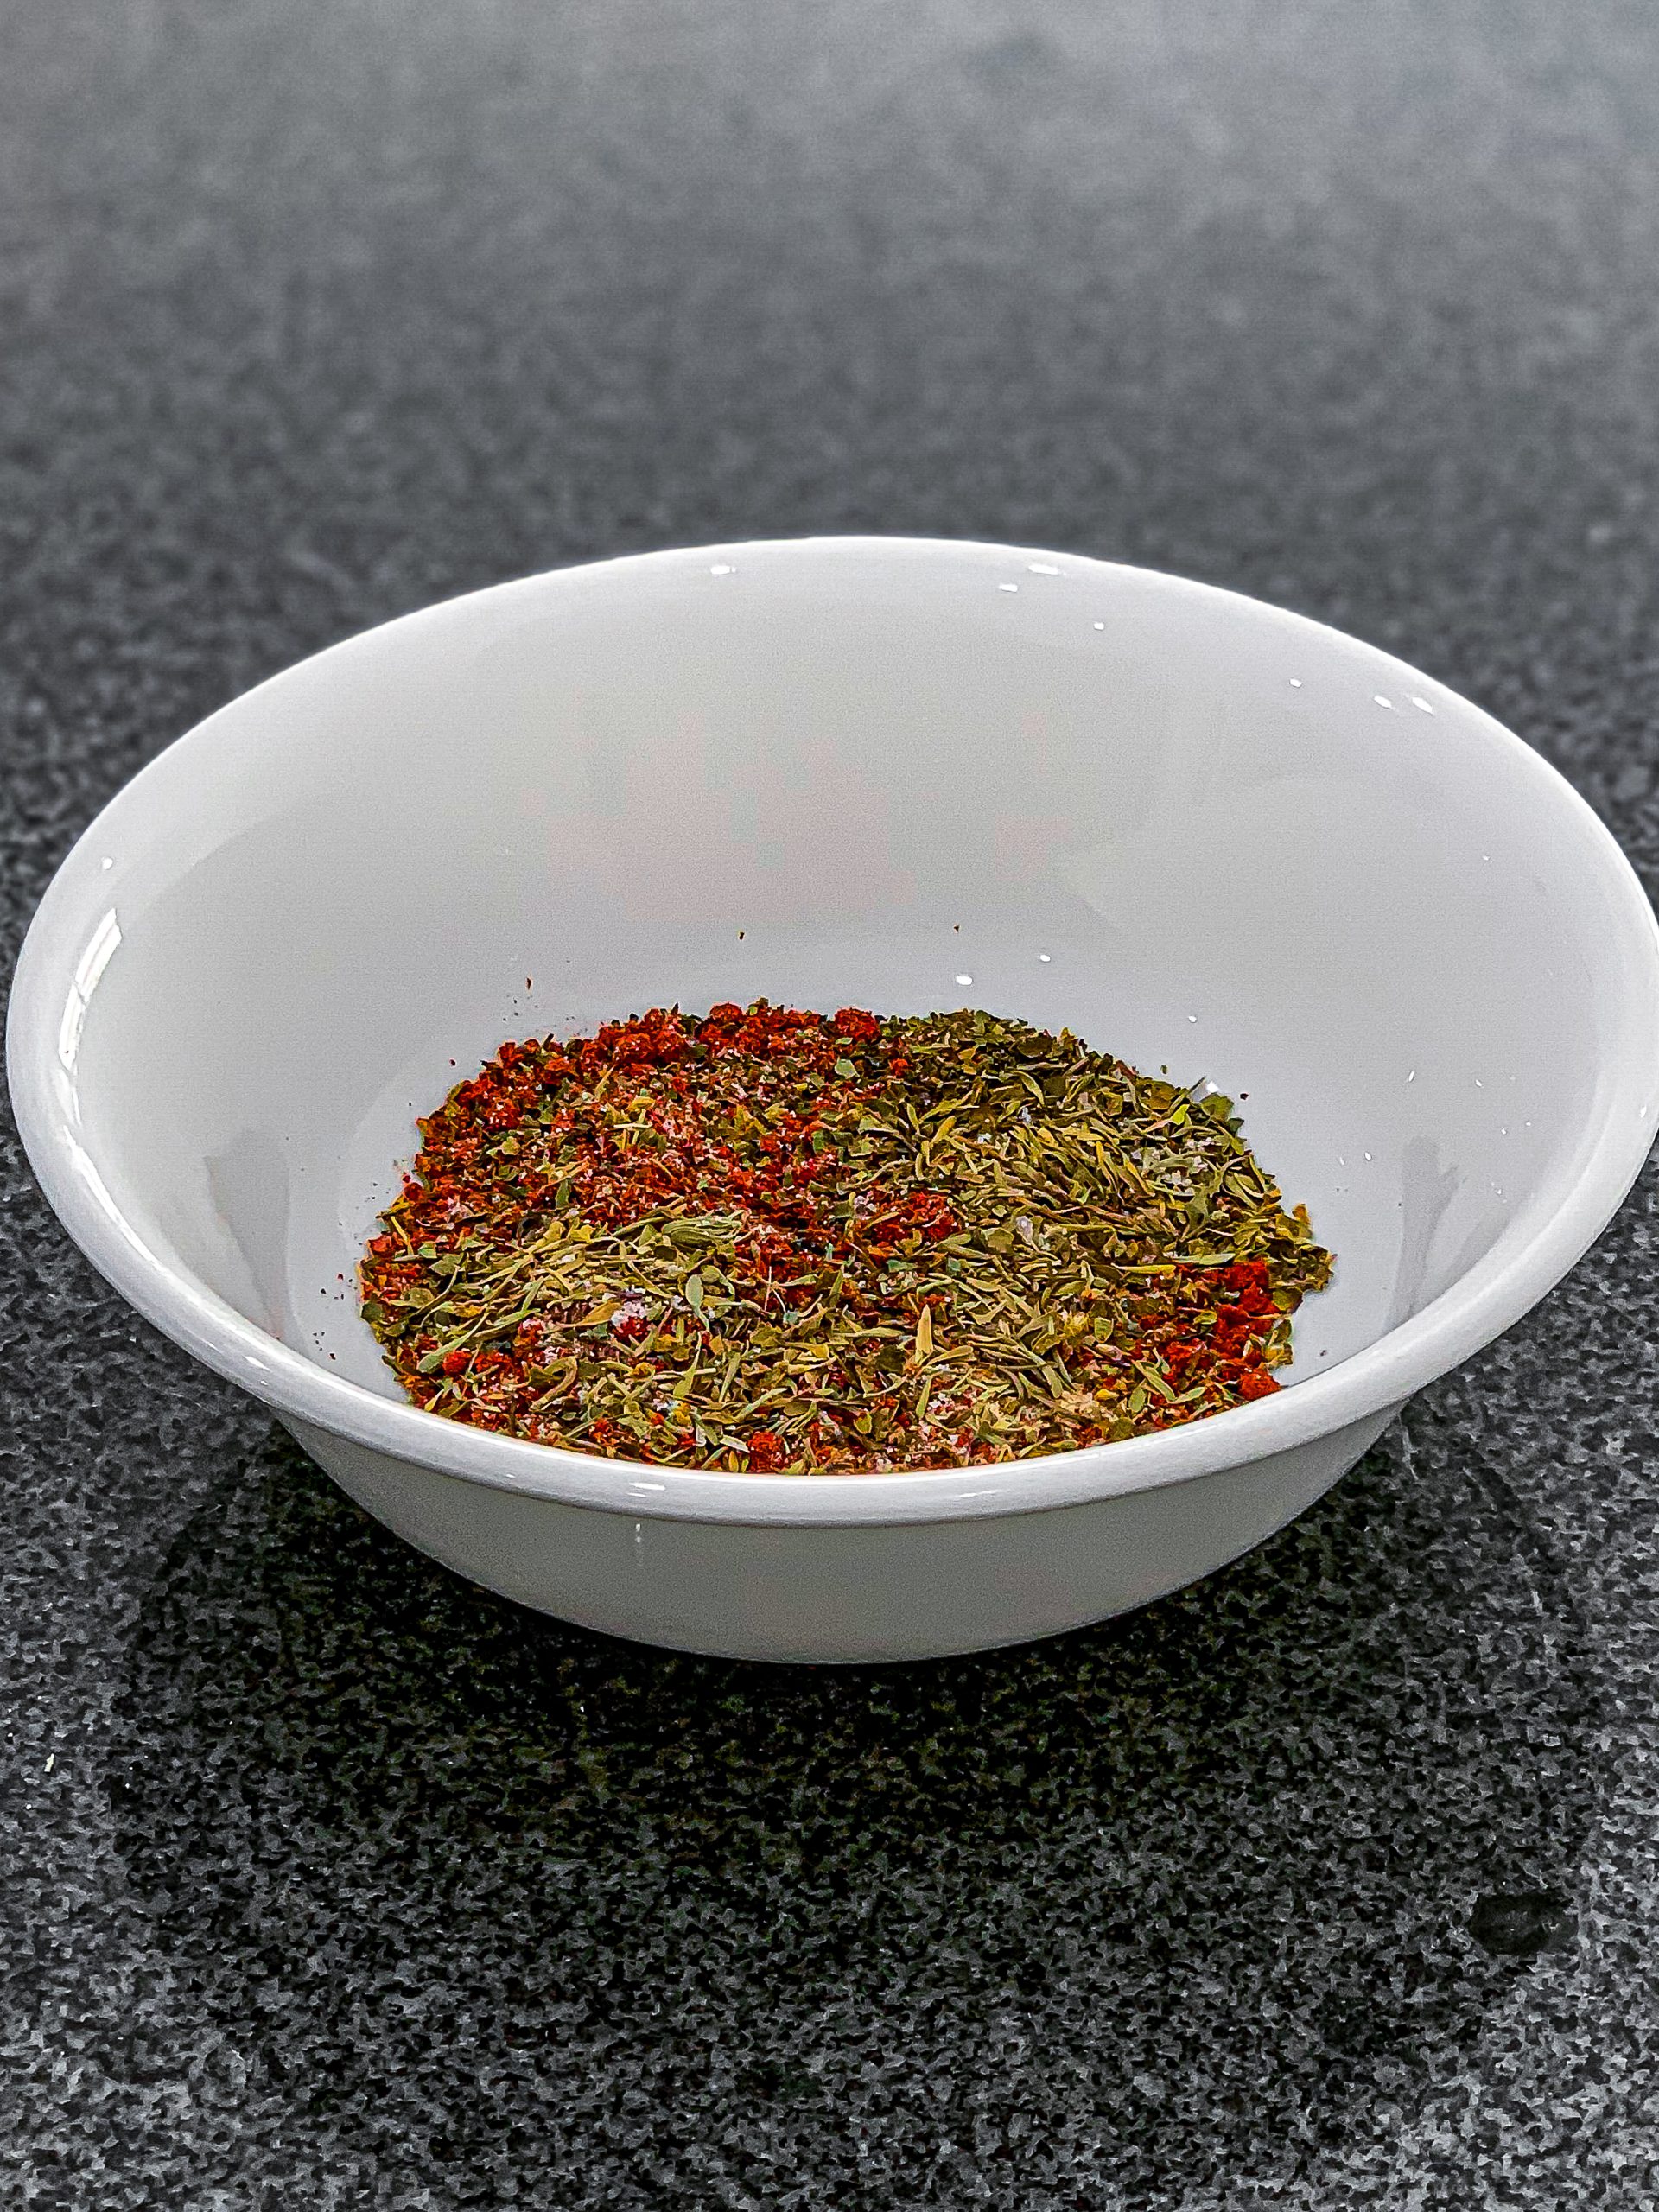 Add dried basil, dried thyme, dried oregano, paprika, onion powder, salt, and pepper in a small bowl and mix well.